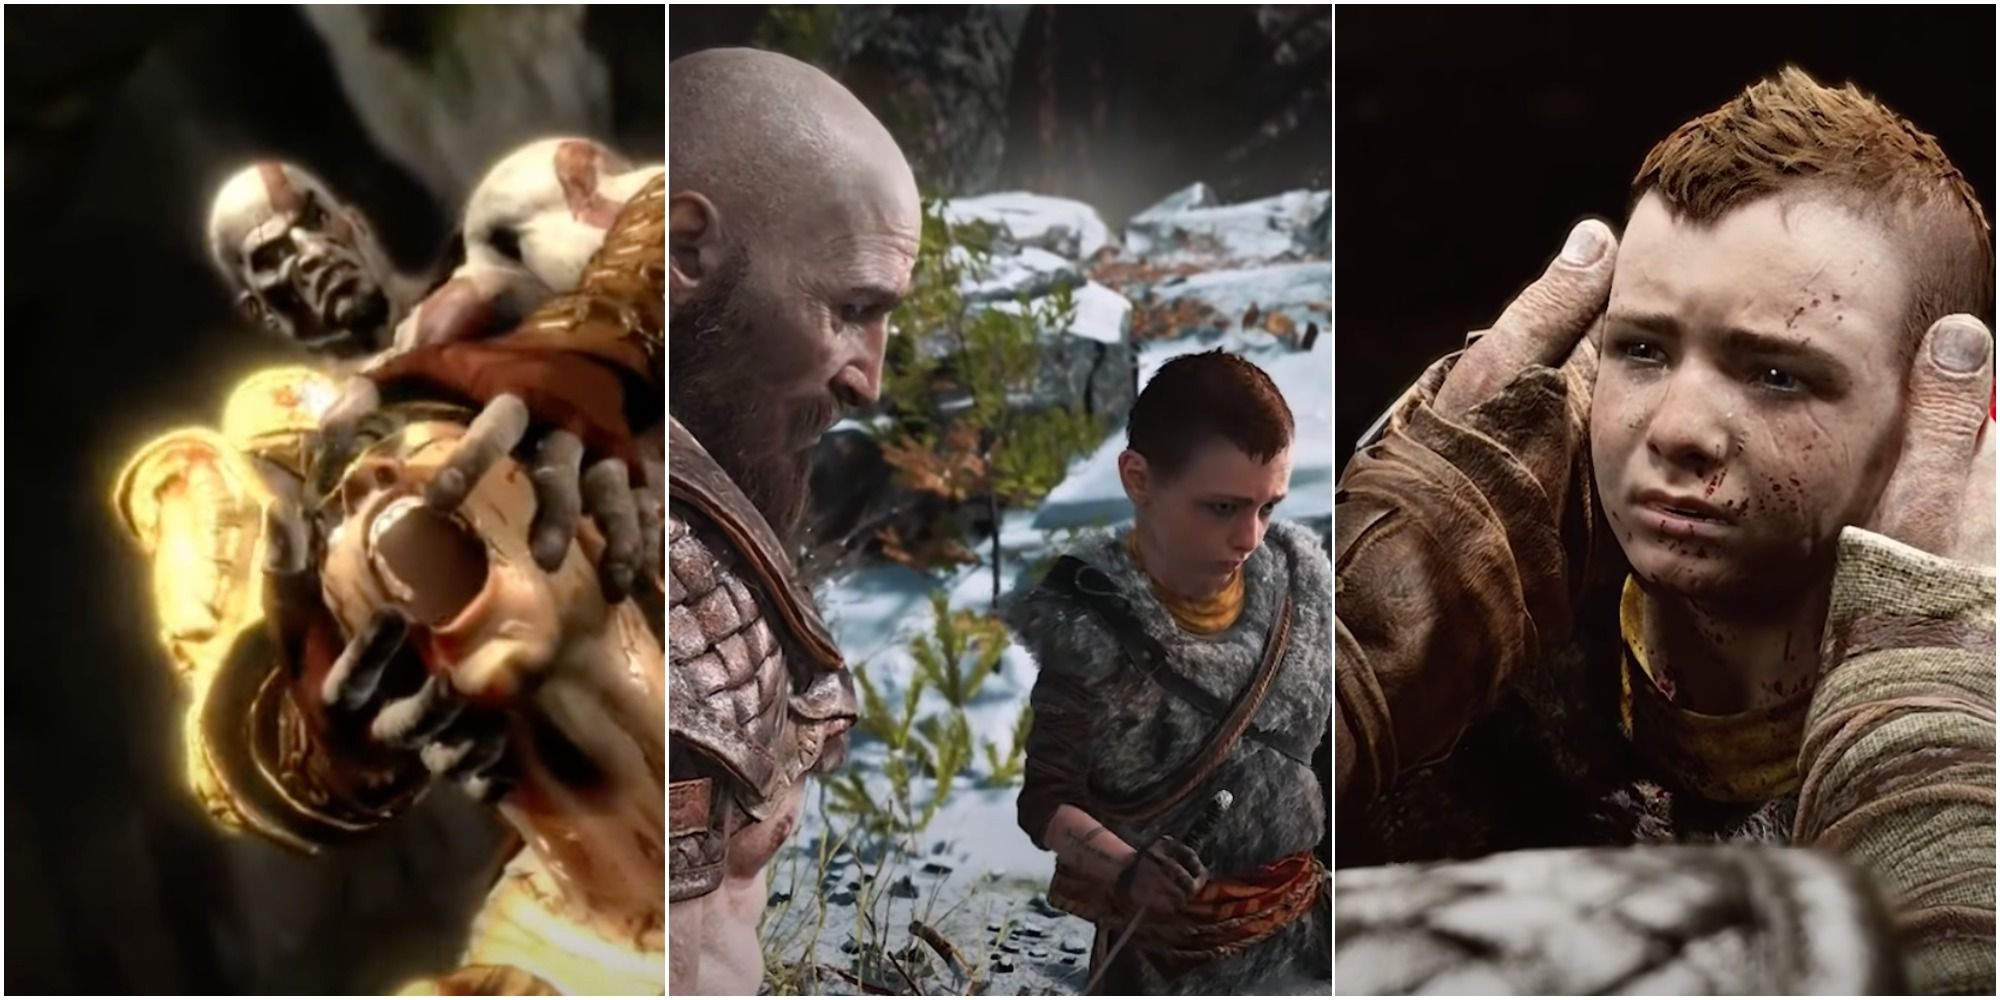 God of War Kratos removing Apolo's head and photos with his son.